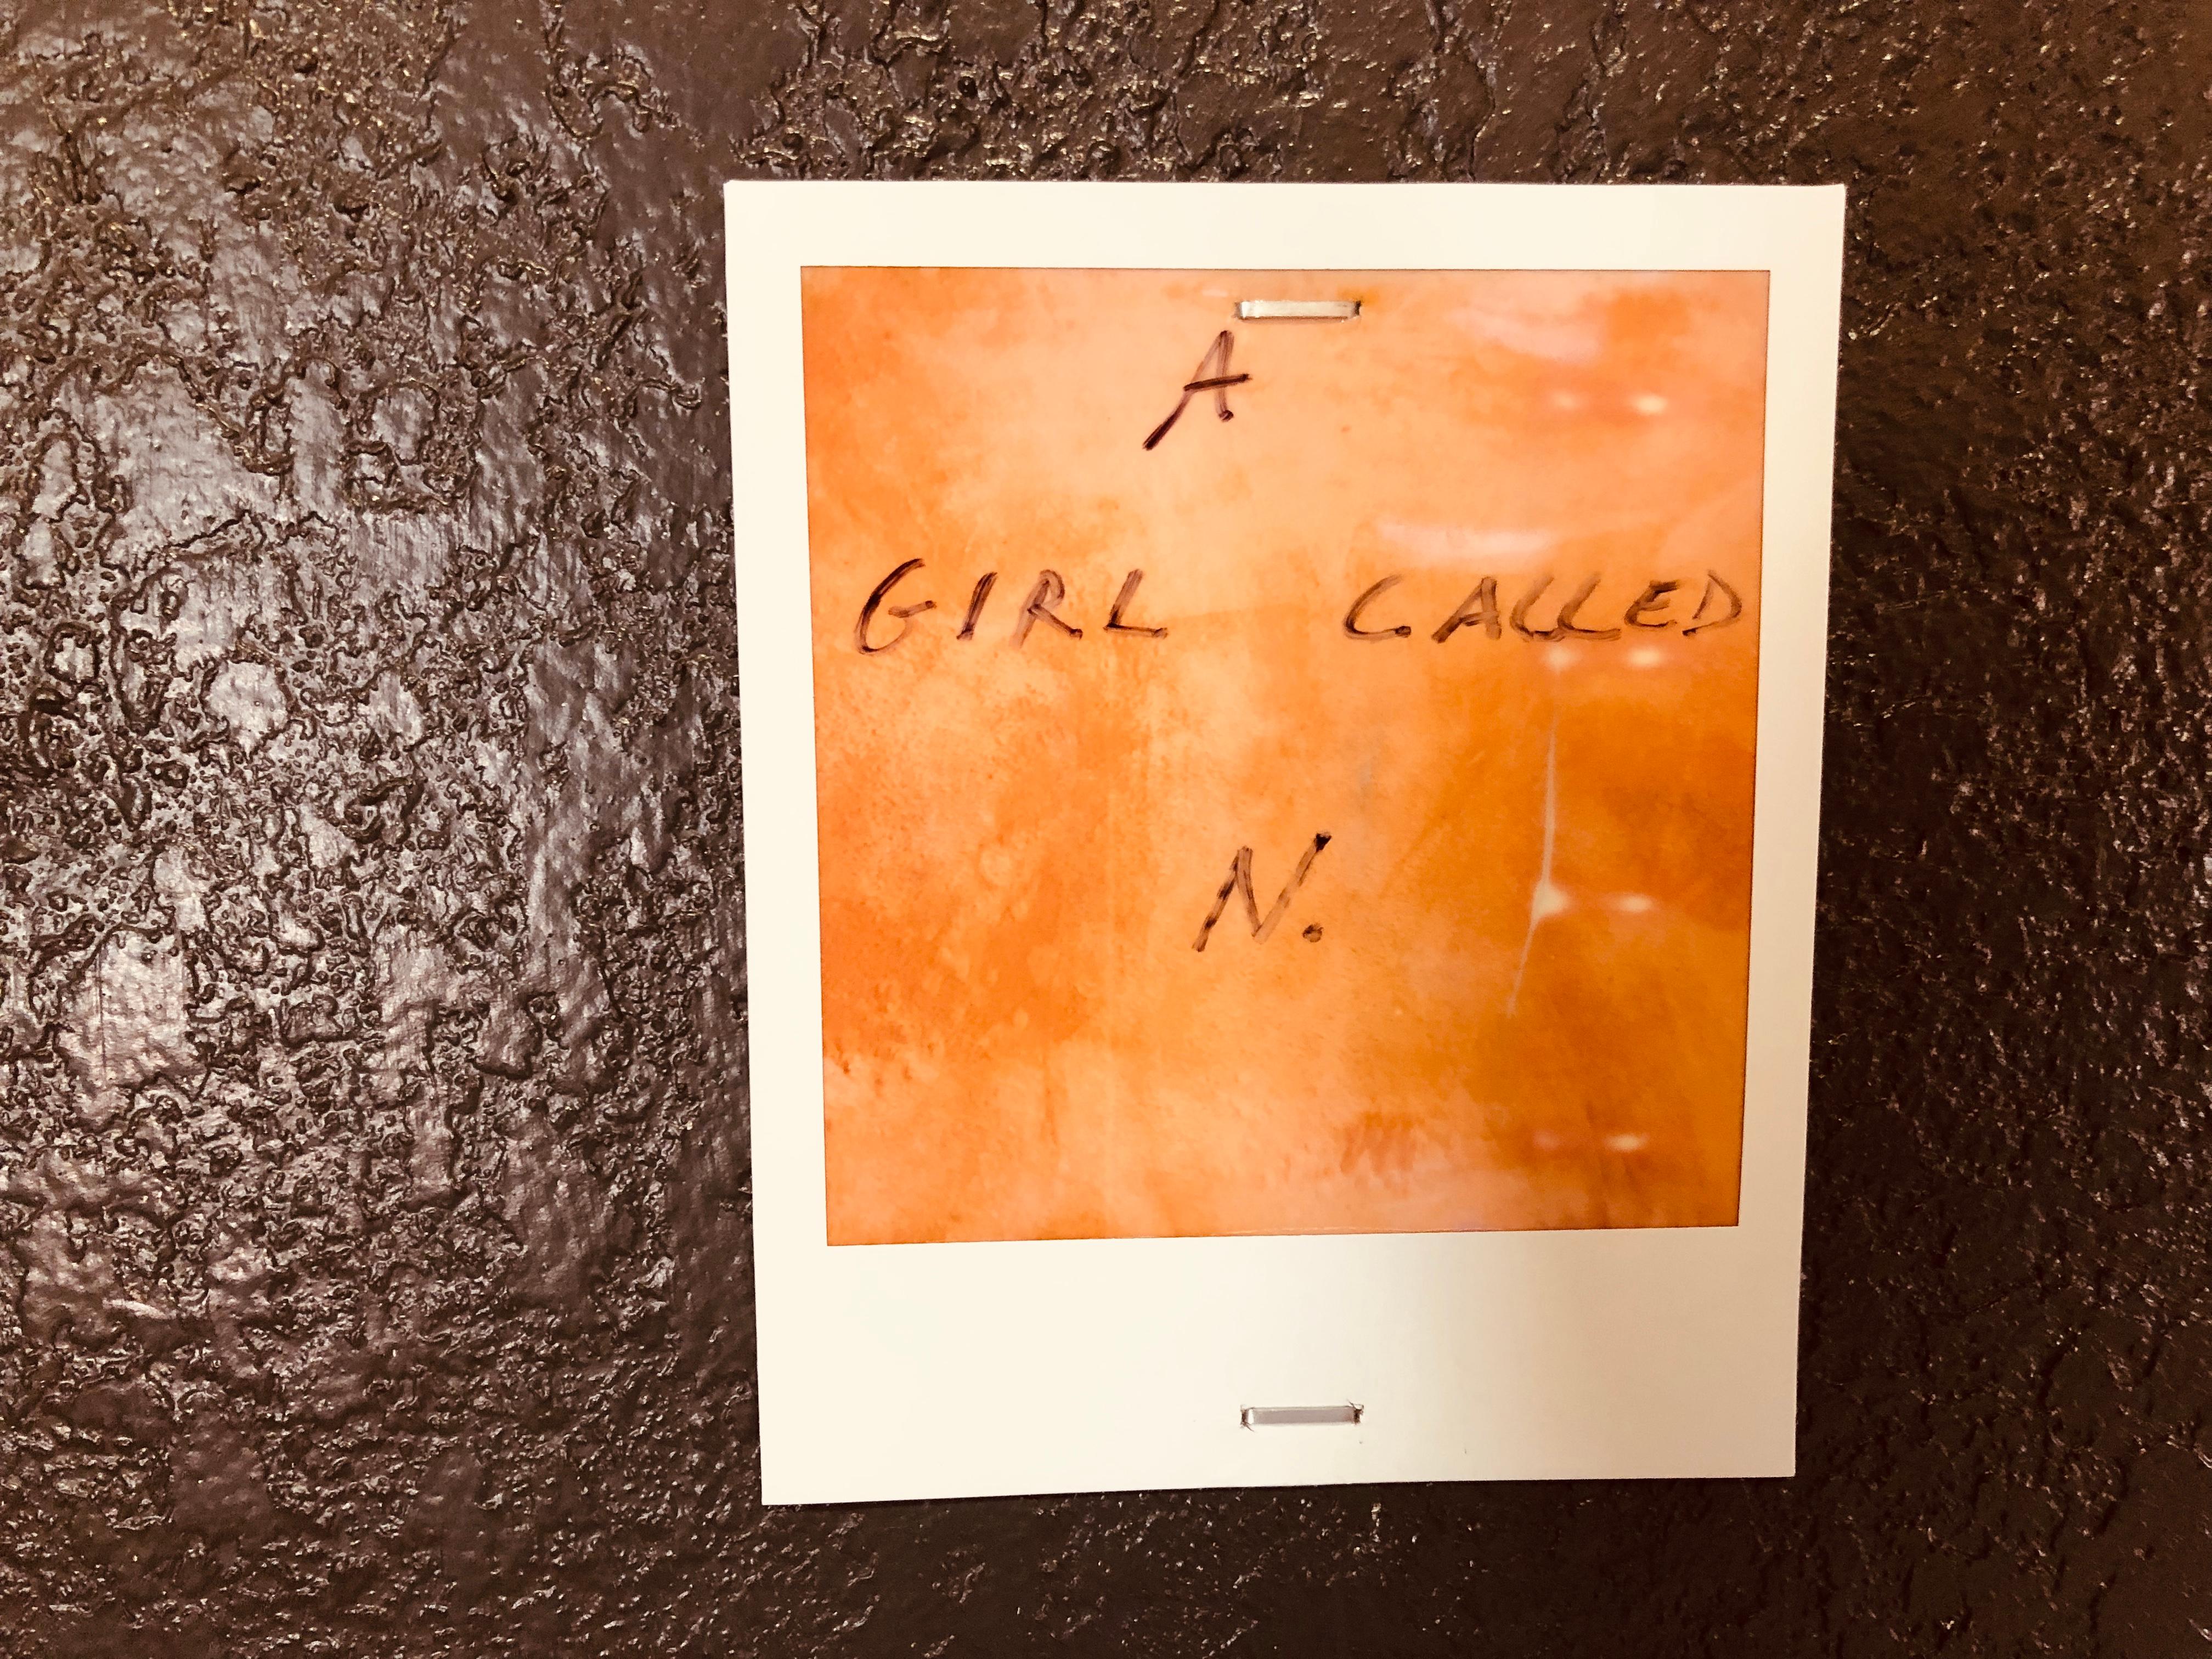 'Come on' part of the series 'A girl called N.' - 2019, 

20x20cm, 
Edition 4/7.  
Archival C-Print based on a Polaroid. 
Signature label and certificate. 
Artist inventory PL2019-517. 
Mounted on Dibond with matte UV-Protection. 

This piece is